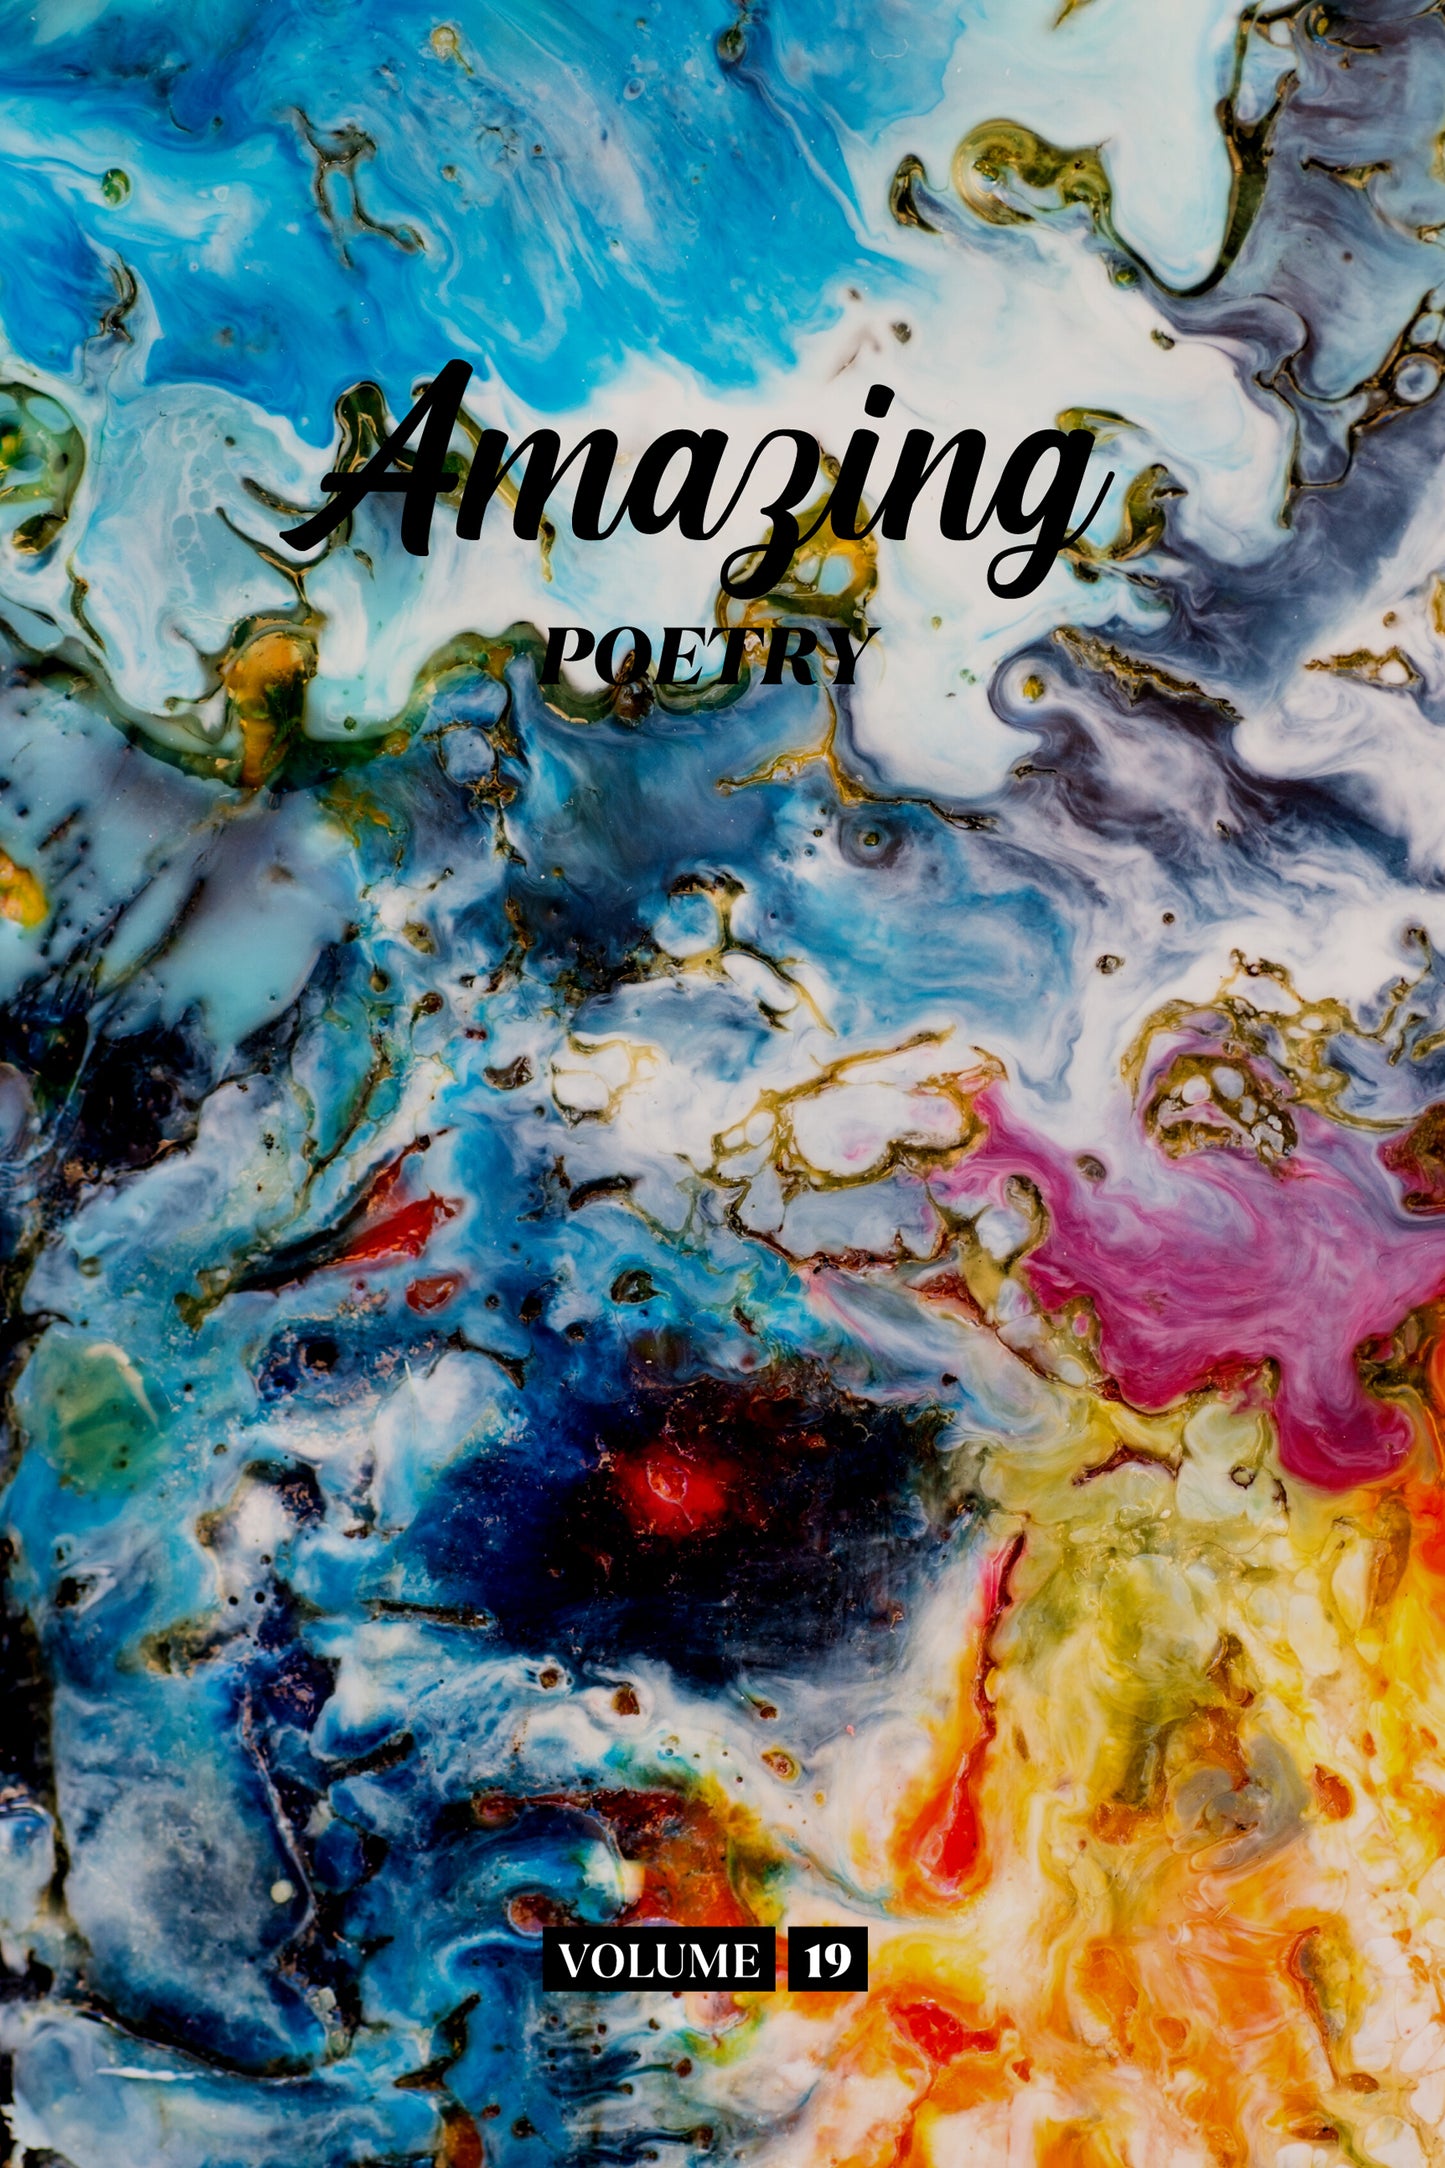 Amazing Poetry (Volume 19) - Physical Book (Pre-Order)